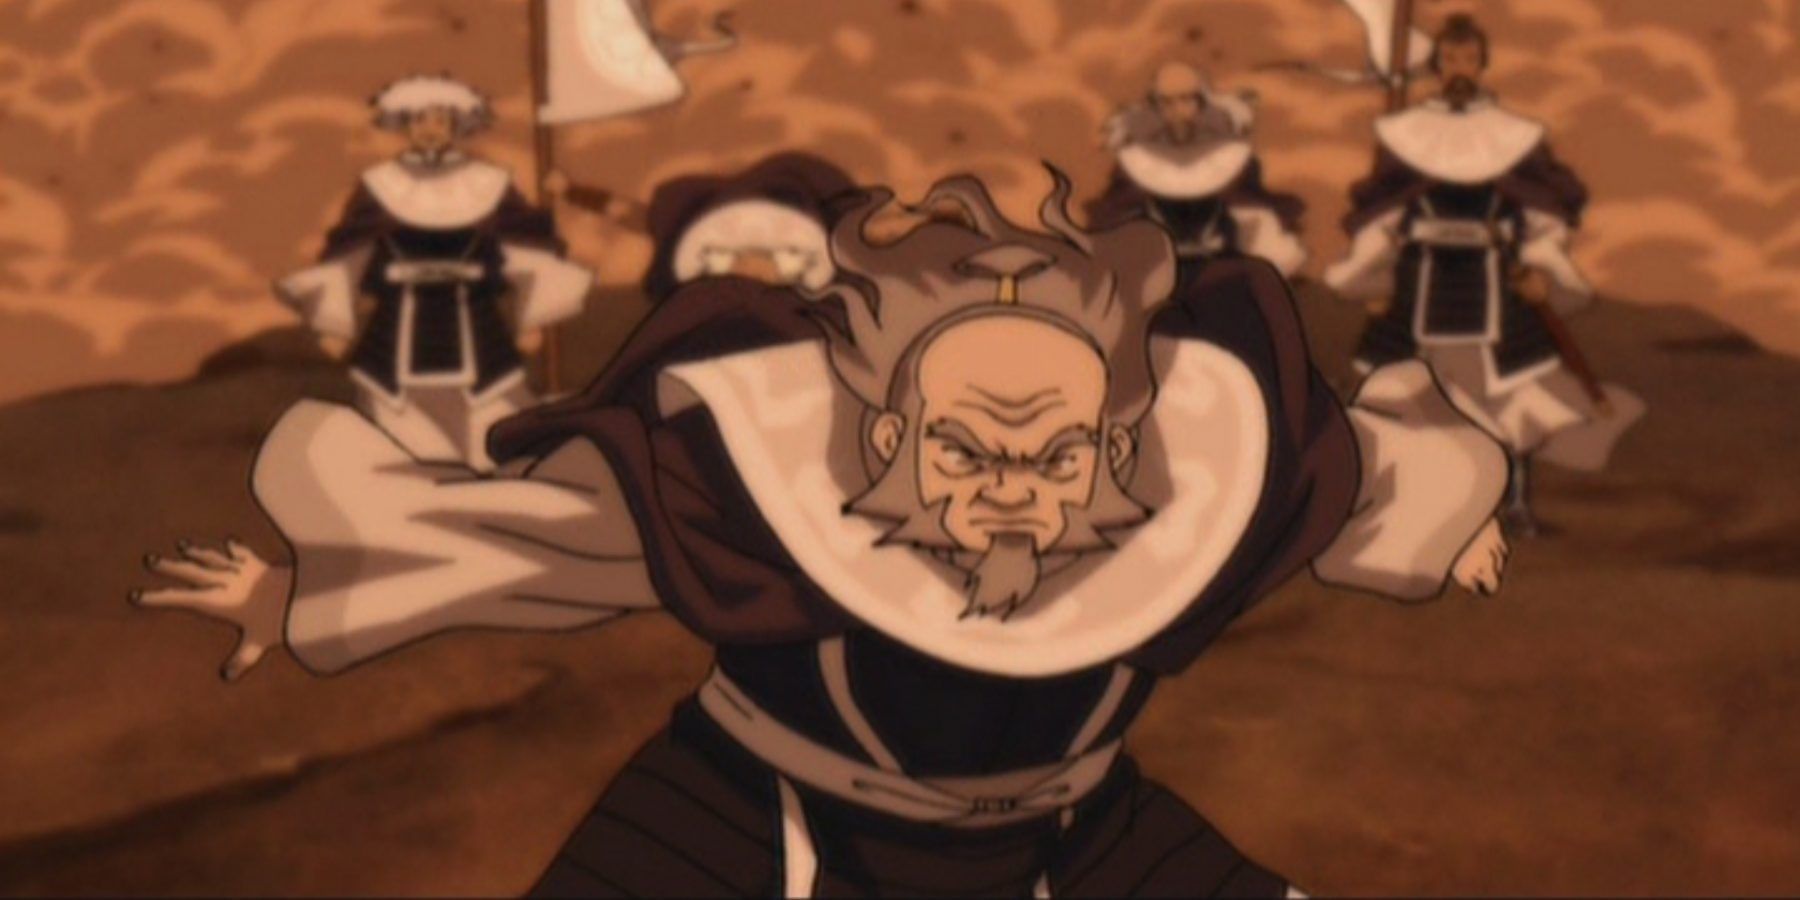 Iroh leads the White Lotus in Last Airbender